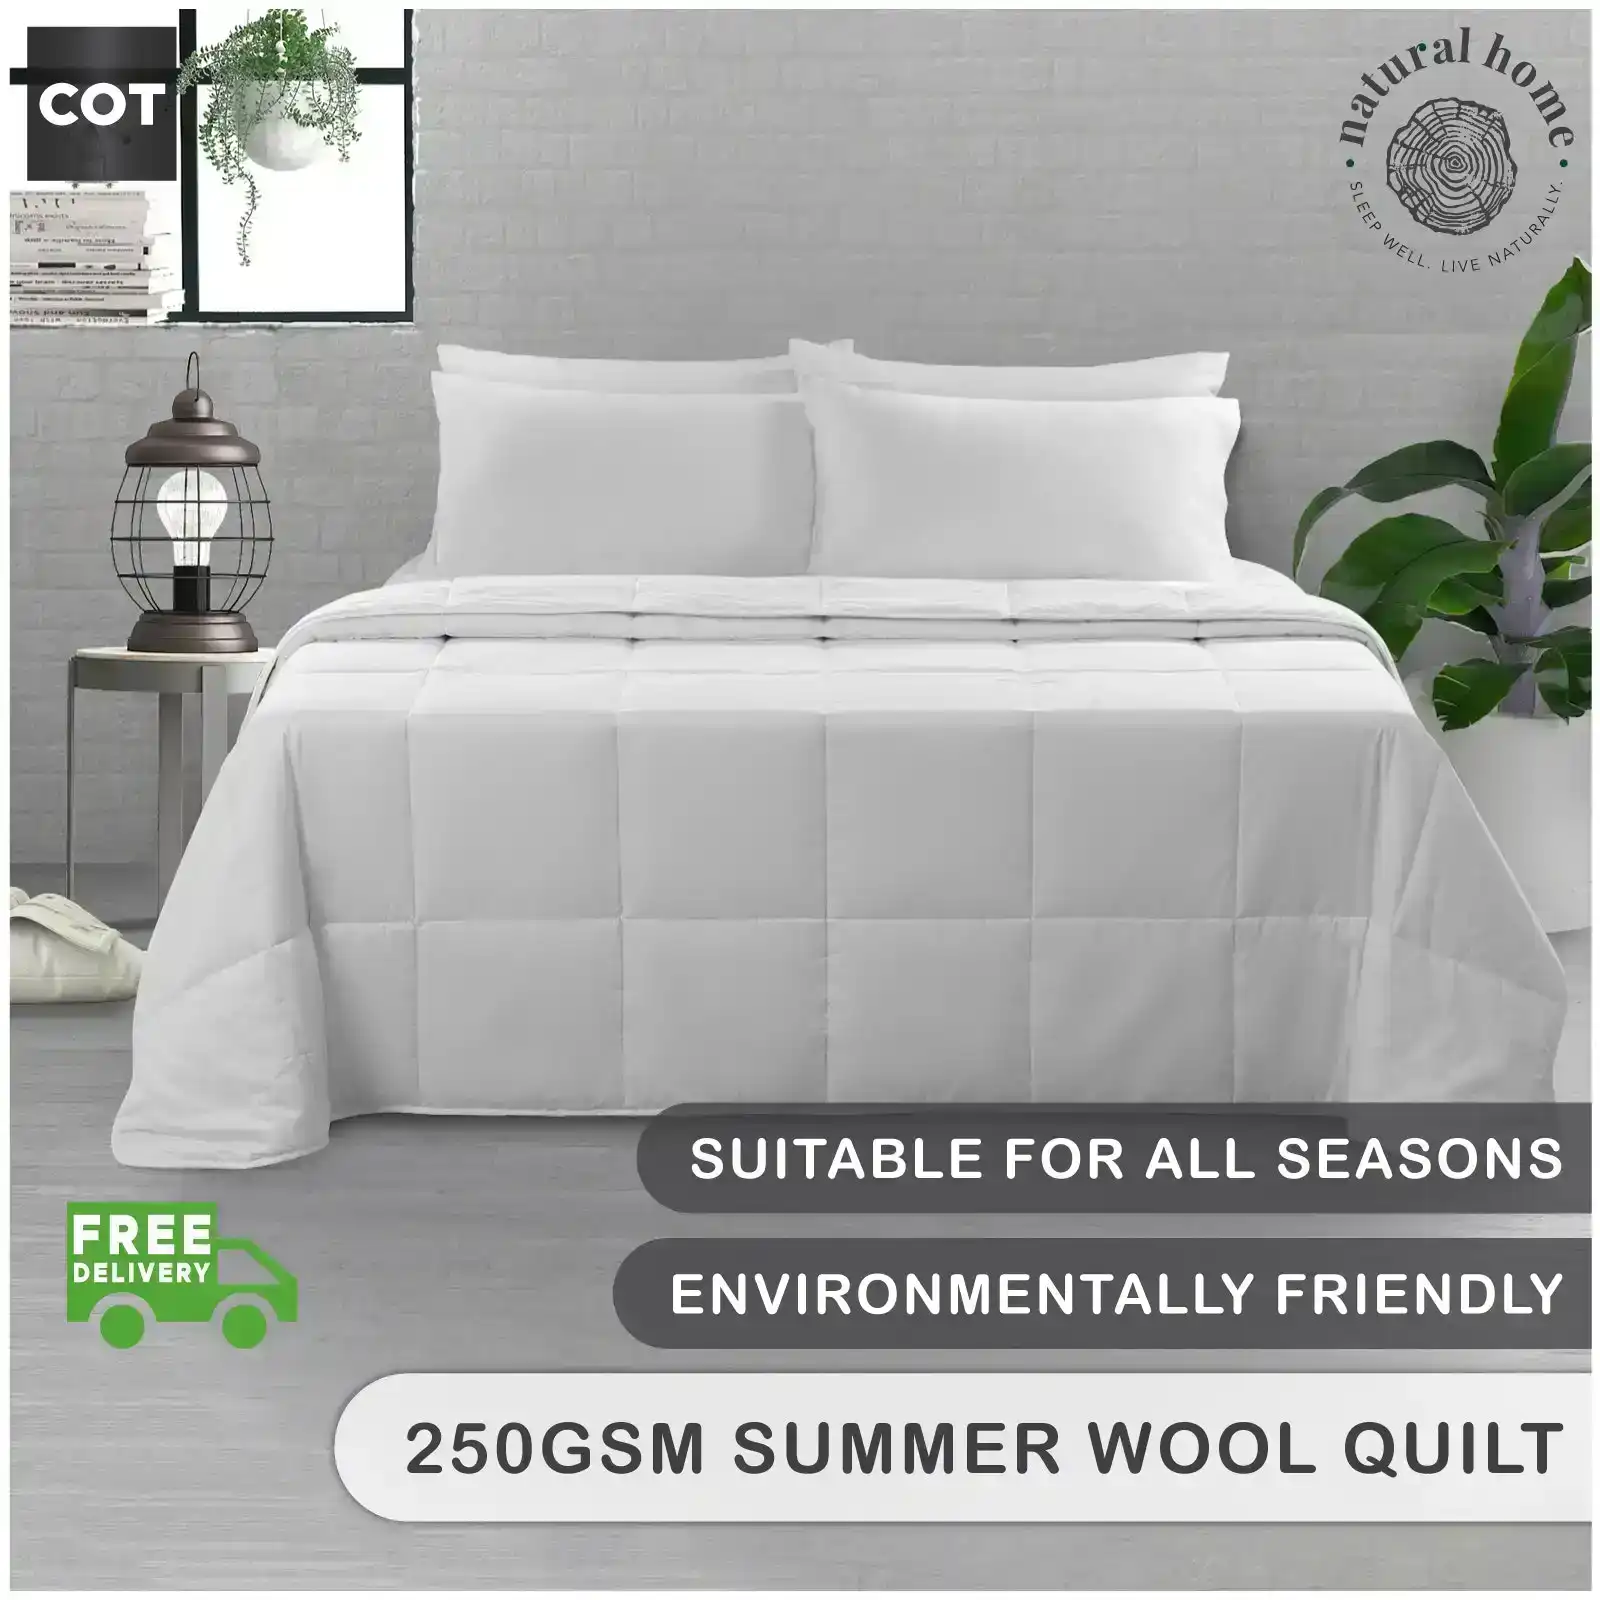 Natural Home Summer Wool Quilt 250gsm - White - COT